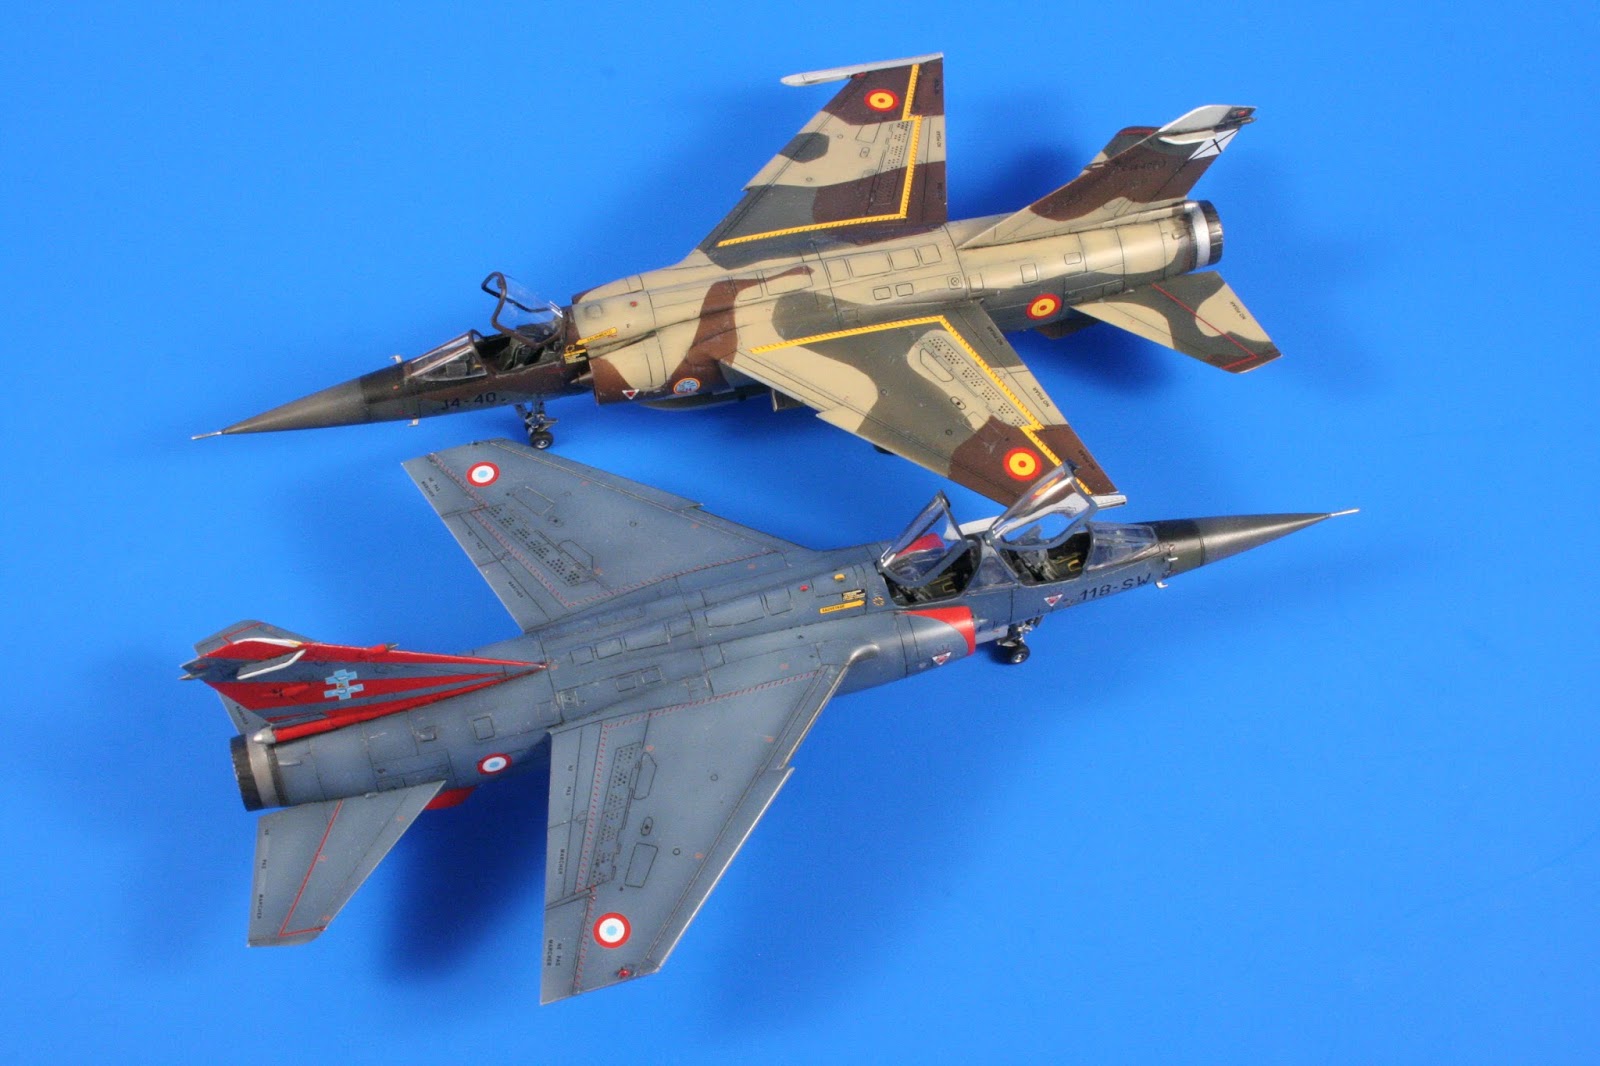 Ch ce. Mirage f1ce. Mirage f.1 EQ/ed 1/72. Mirage f.1ce/Ch (Special Hobby sh72289). Mirage f1 1/72.